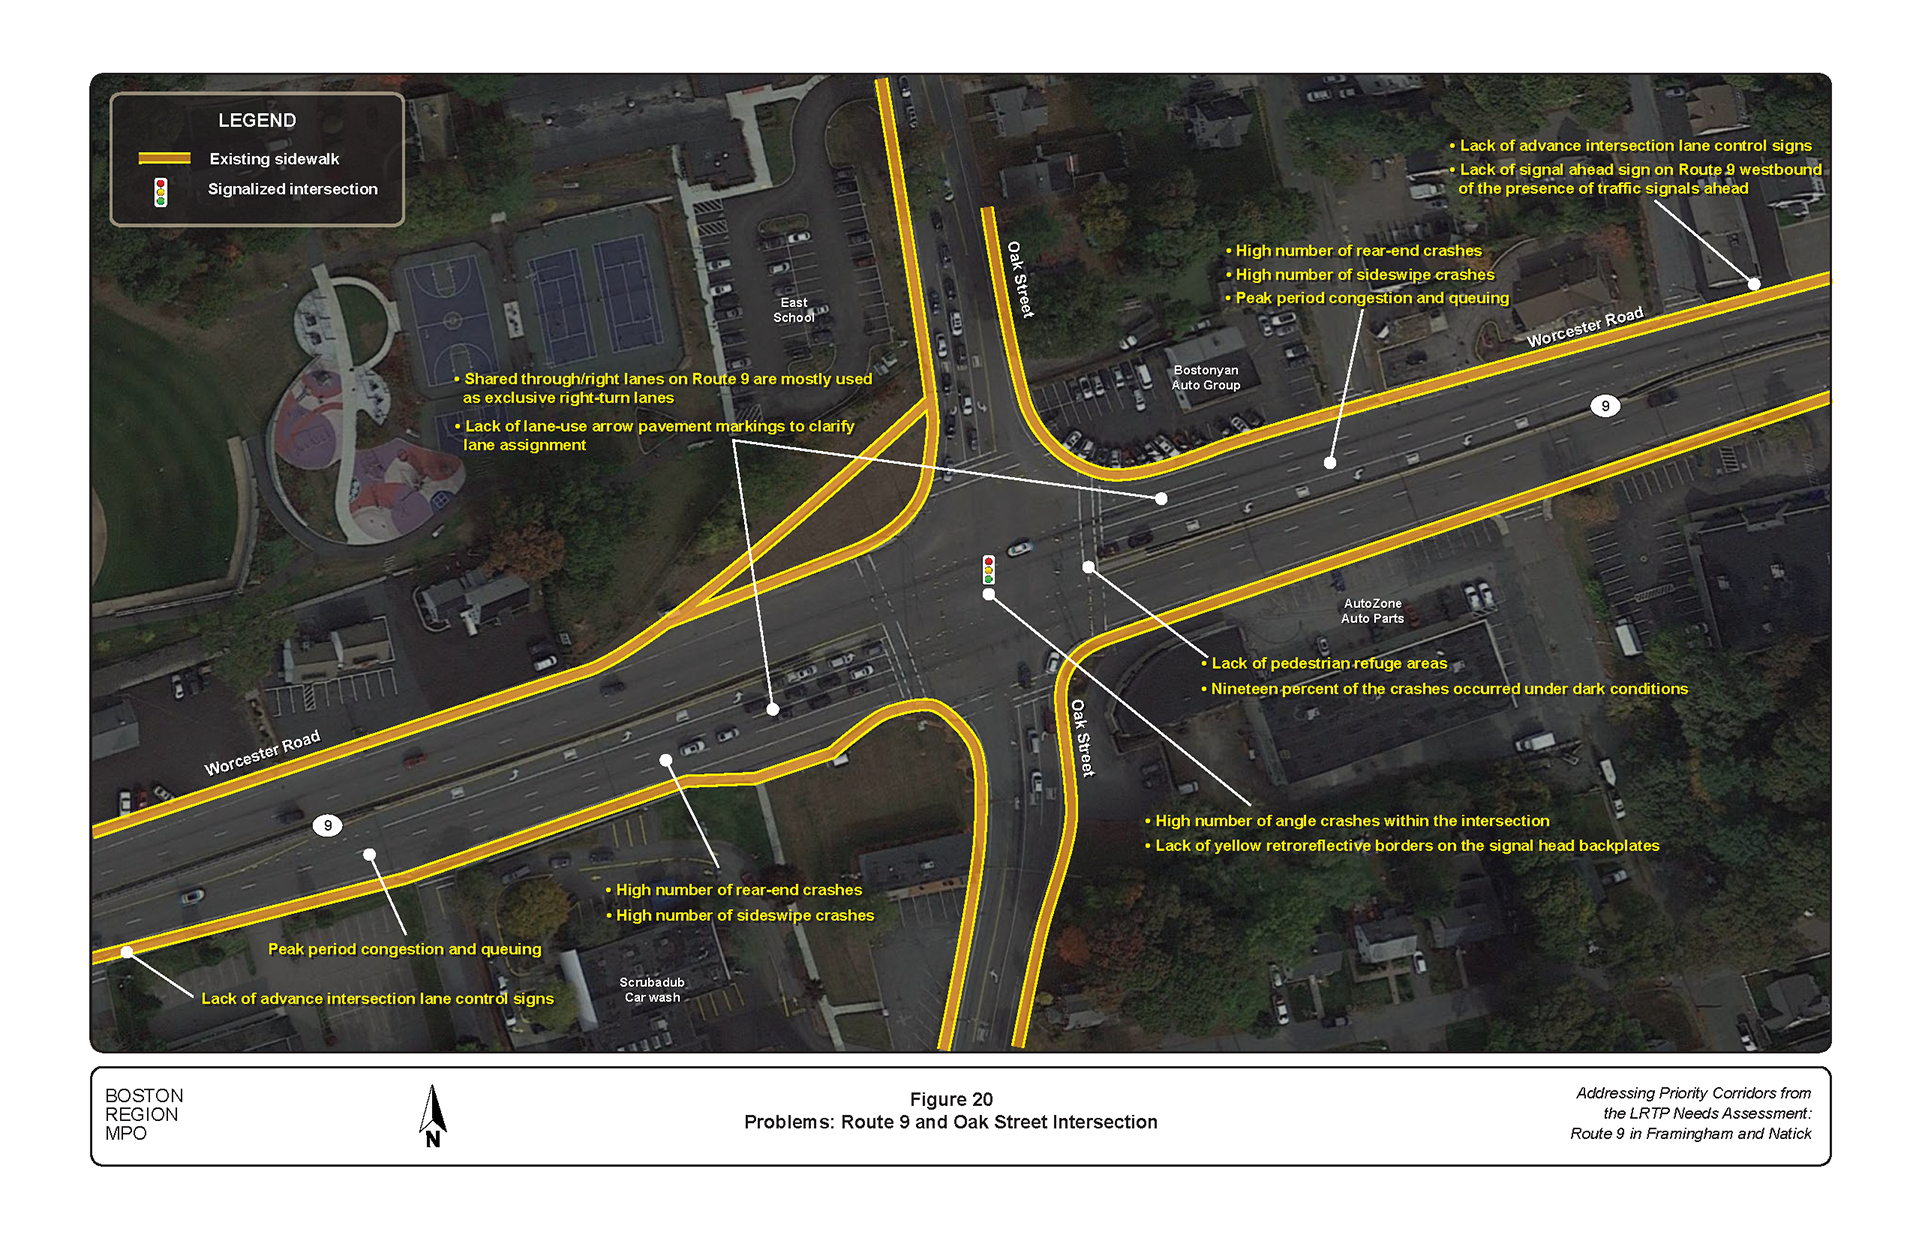 Figure 20 is an aerial photo showing the intersection of Route 9 and Oak Street and the problems